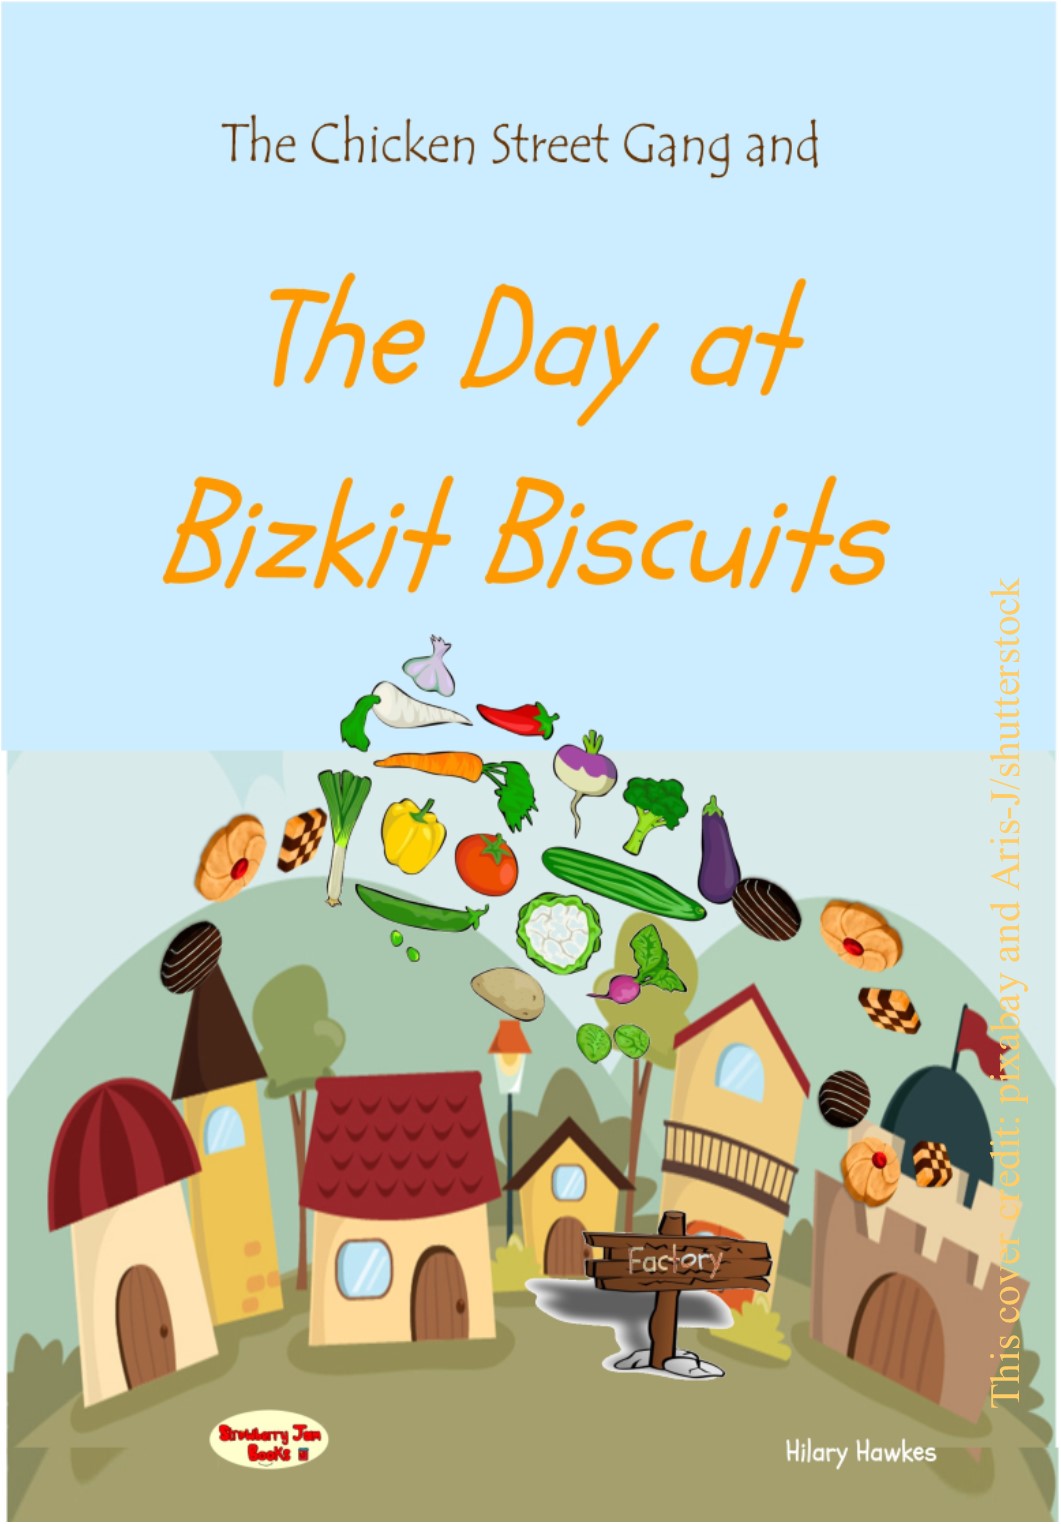 The Day At Bizkit Biscuits